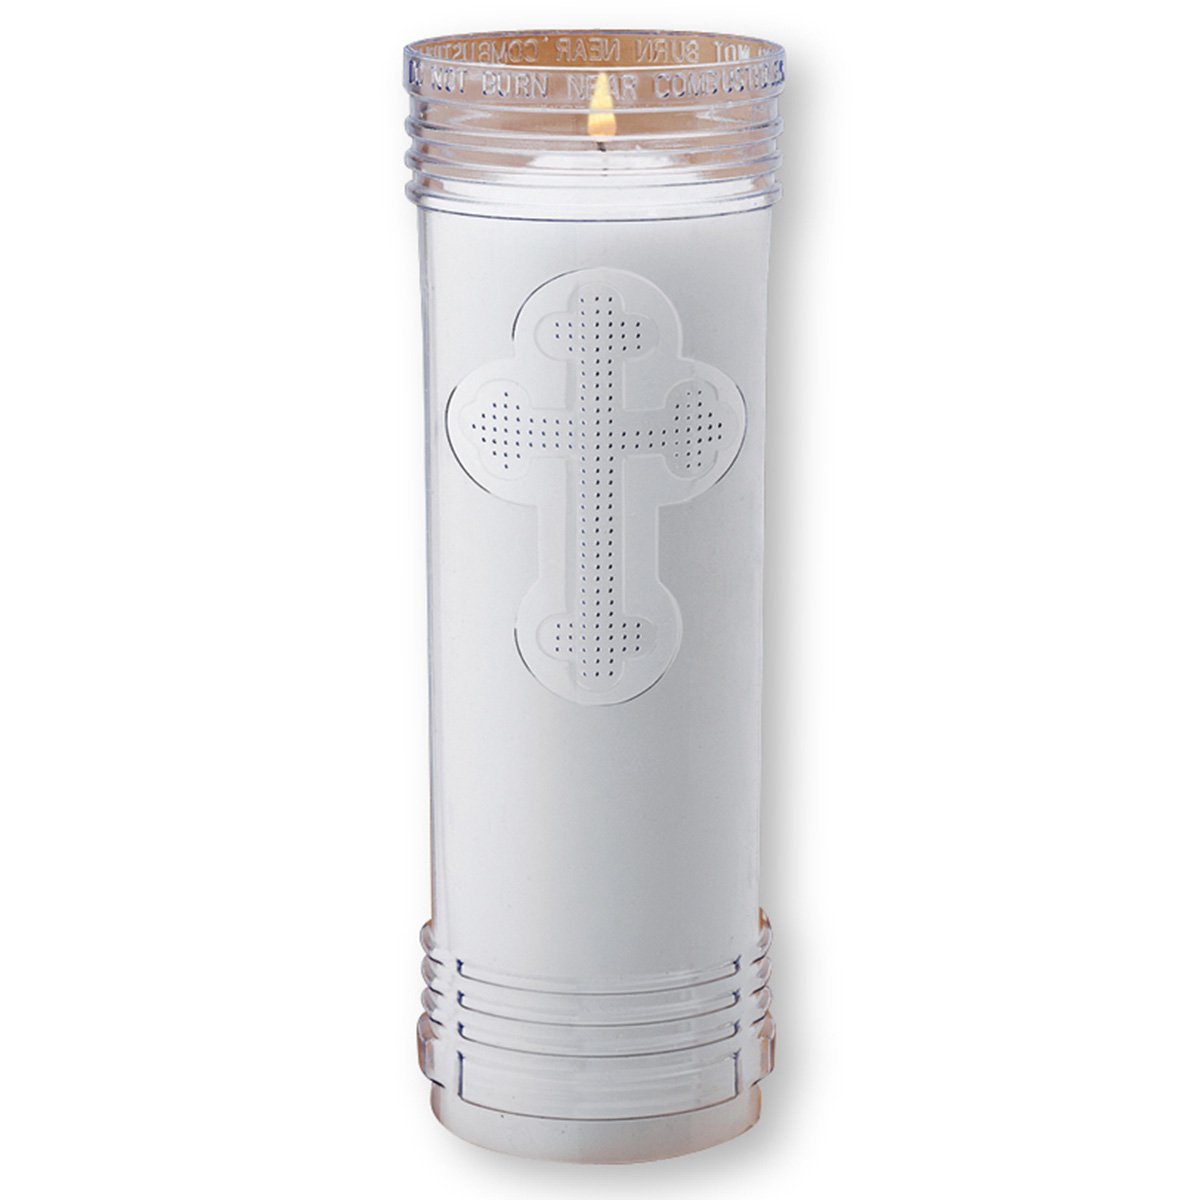 Perpetualite Candle, case of 24